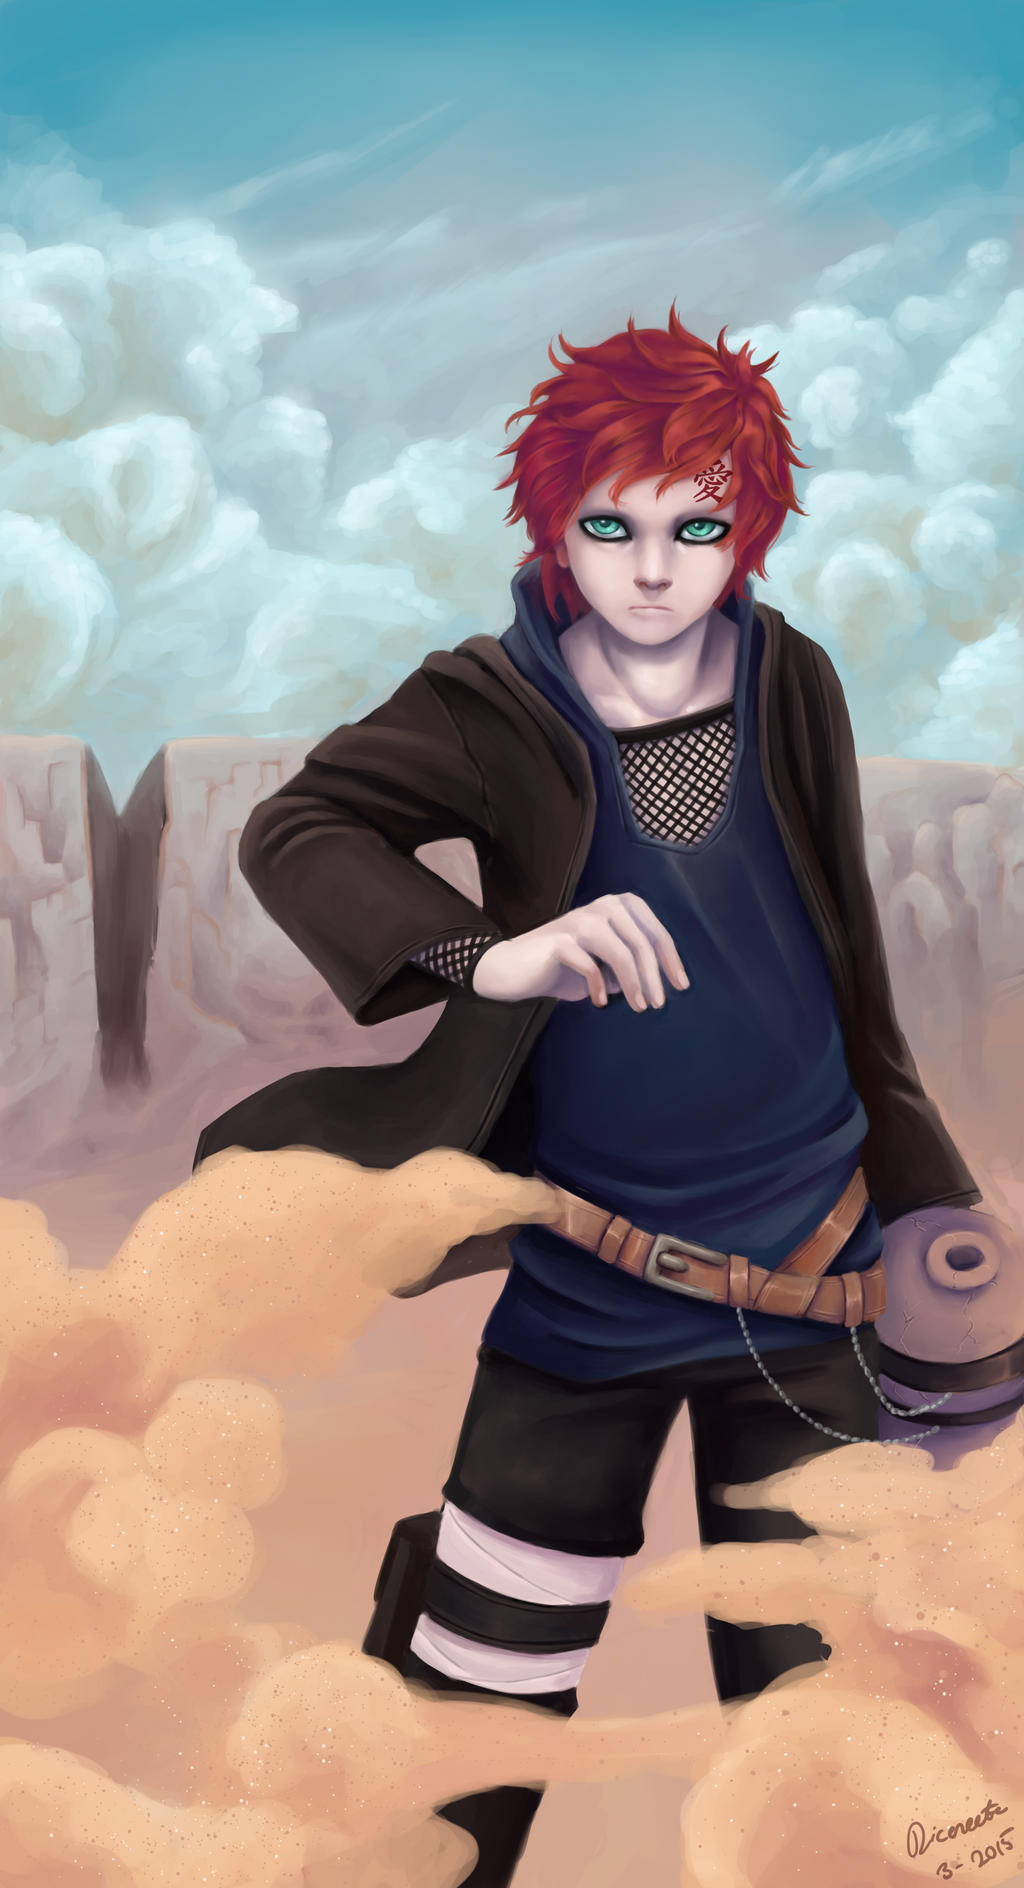 Protecting my home - Gaara of the Desert (video) by Dicenete on DeviantArt